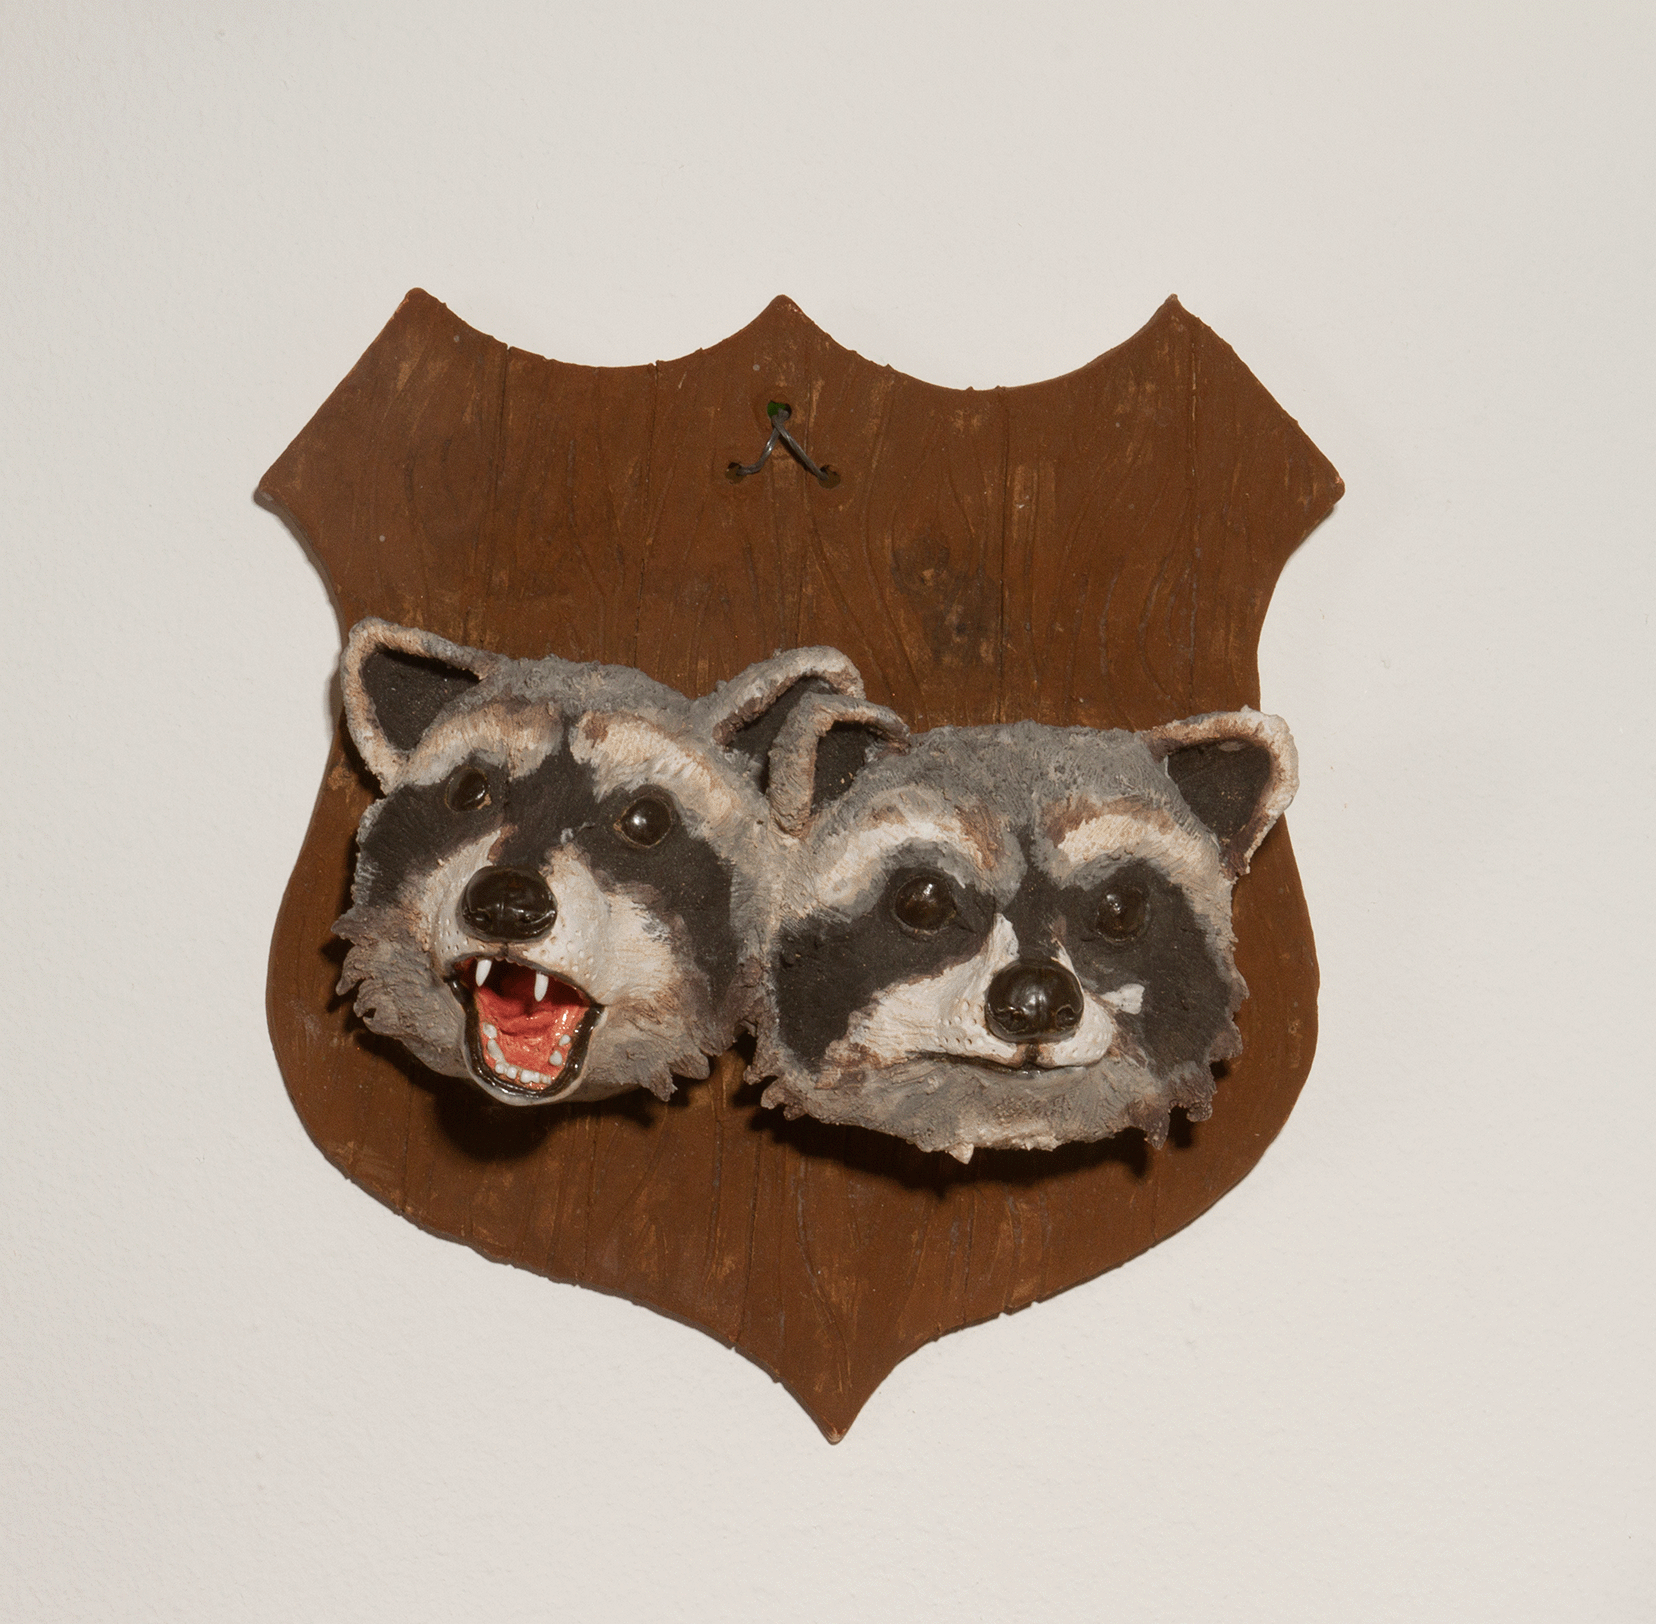 Kathleen Carpenter - They_Them (raccoons).png